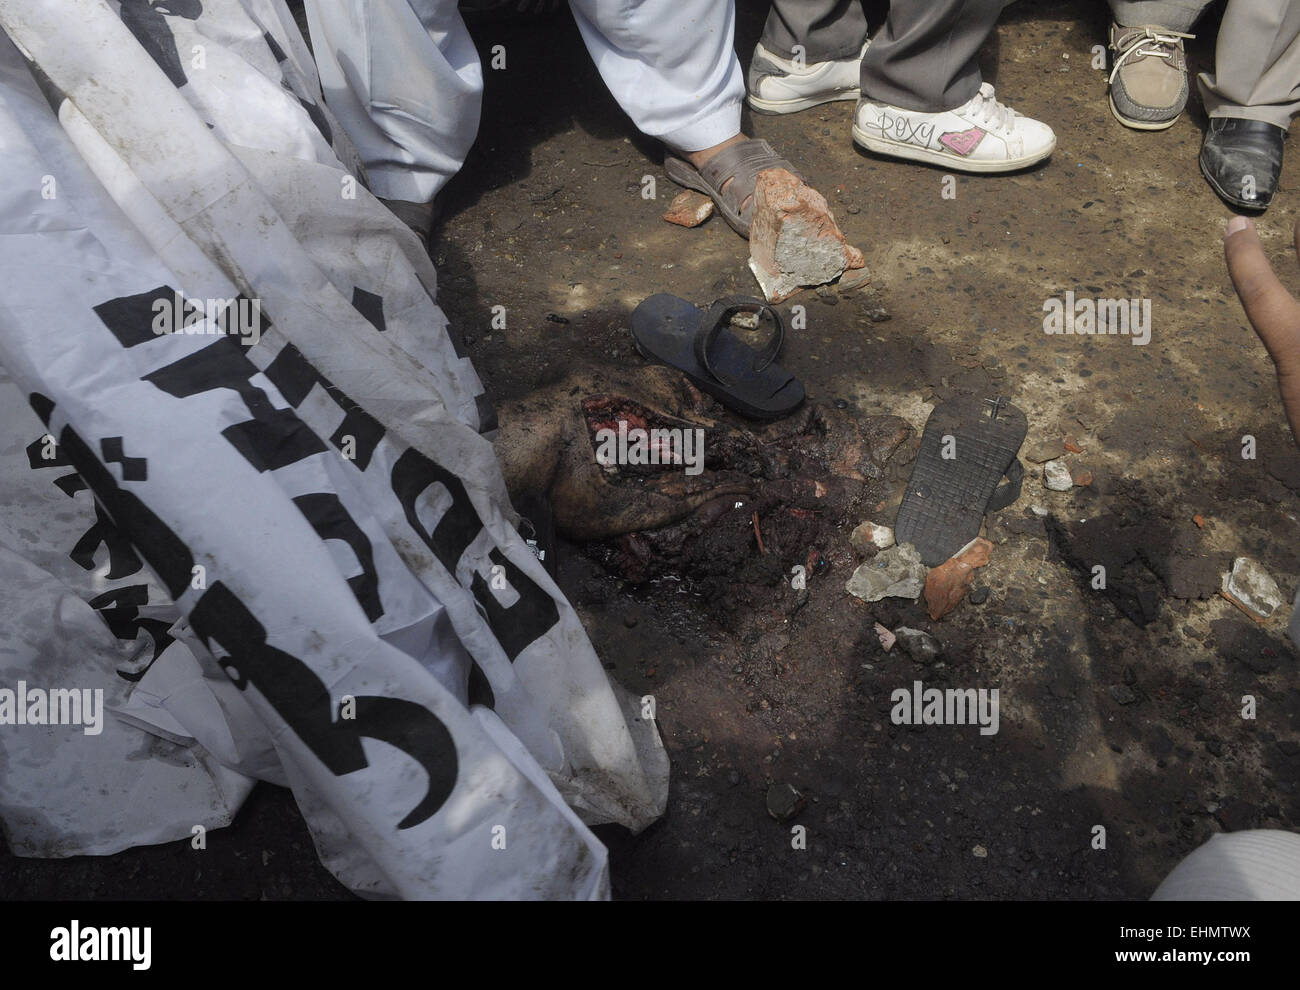 Lahore, Pakistan. 15th March, 2015. People gather around the burning bodies of what the mob called suspects in aiding the suicide bombers nearby the scene of an attack on a church in Lahore, Pakistan, 15 March 2015. Two Taliban suicide bombers blew themselves up outside two churches in the impoverished Yohana Abad sector of eastern Lahore during Sunday mass, killing at least 11 worshipers and wounding several others, officials said, in the latest attack against religious minorities. Credit:  PACIFIC PRESS/Alamy Live News Stock Photo